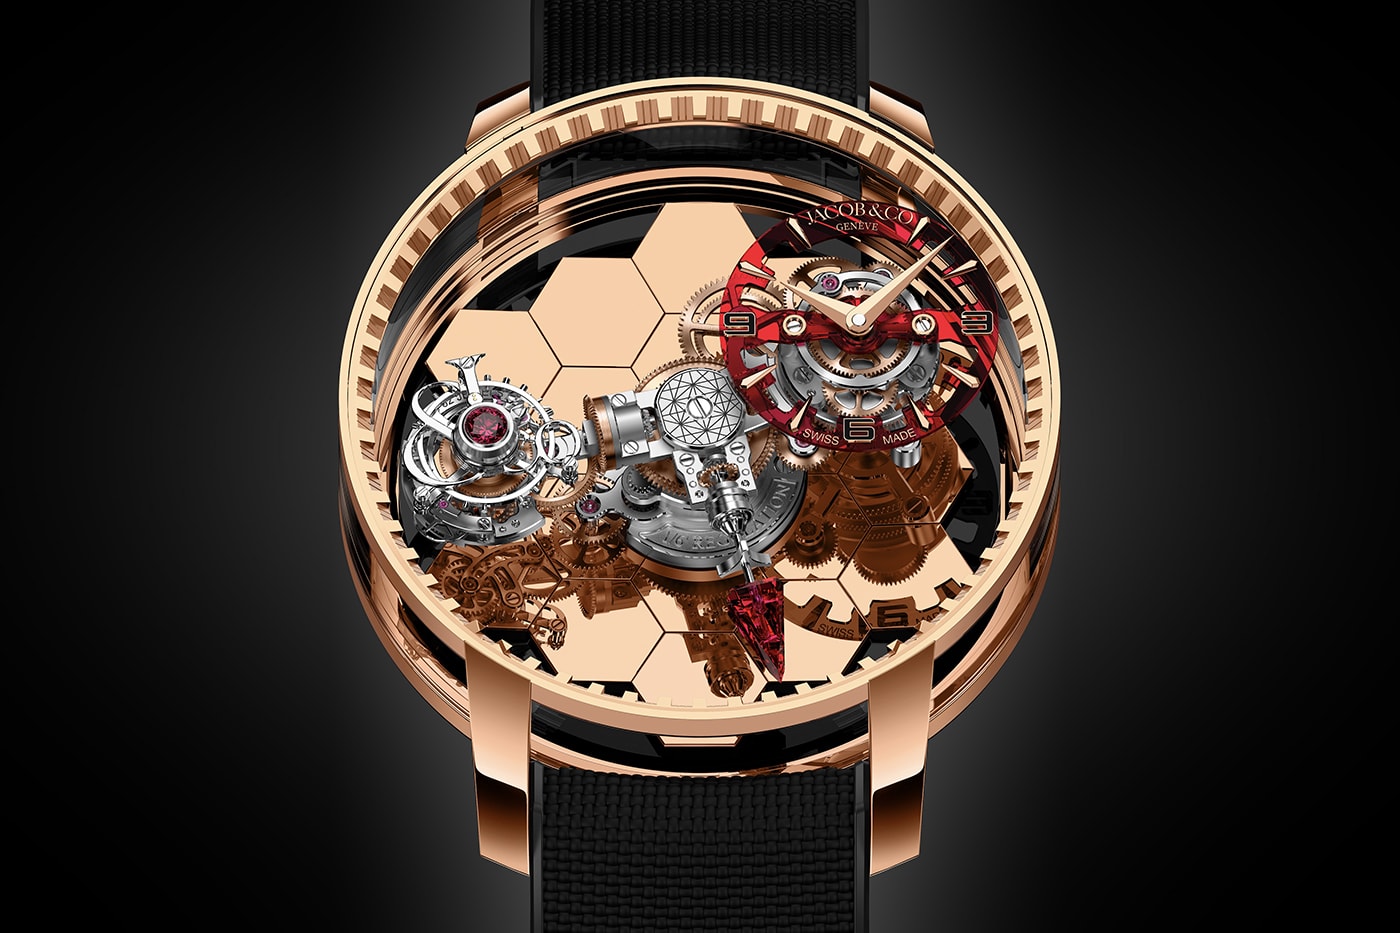 Jacob & Co. Astronomia Revolution Limited-Edition Watch Release Info